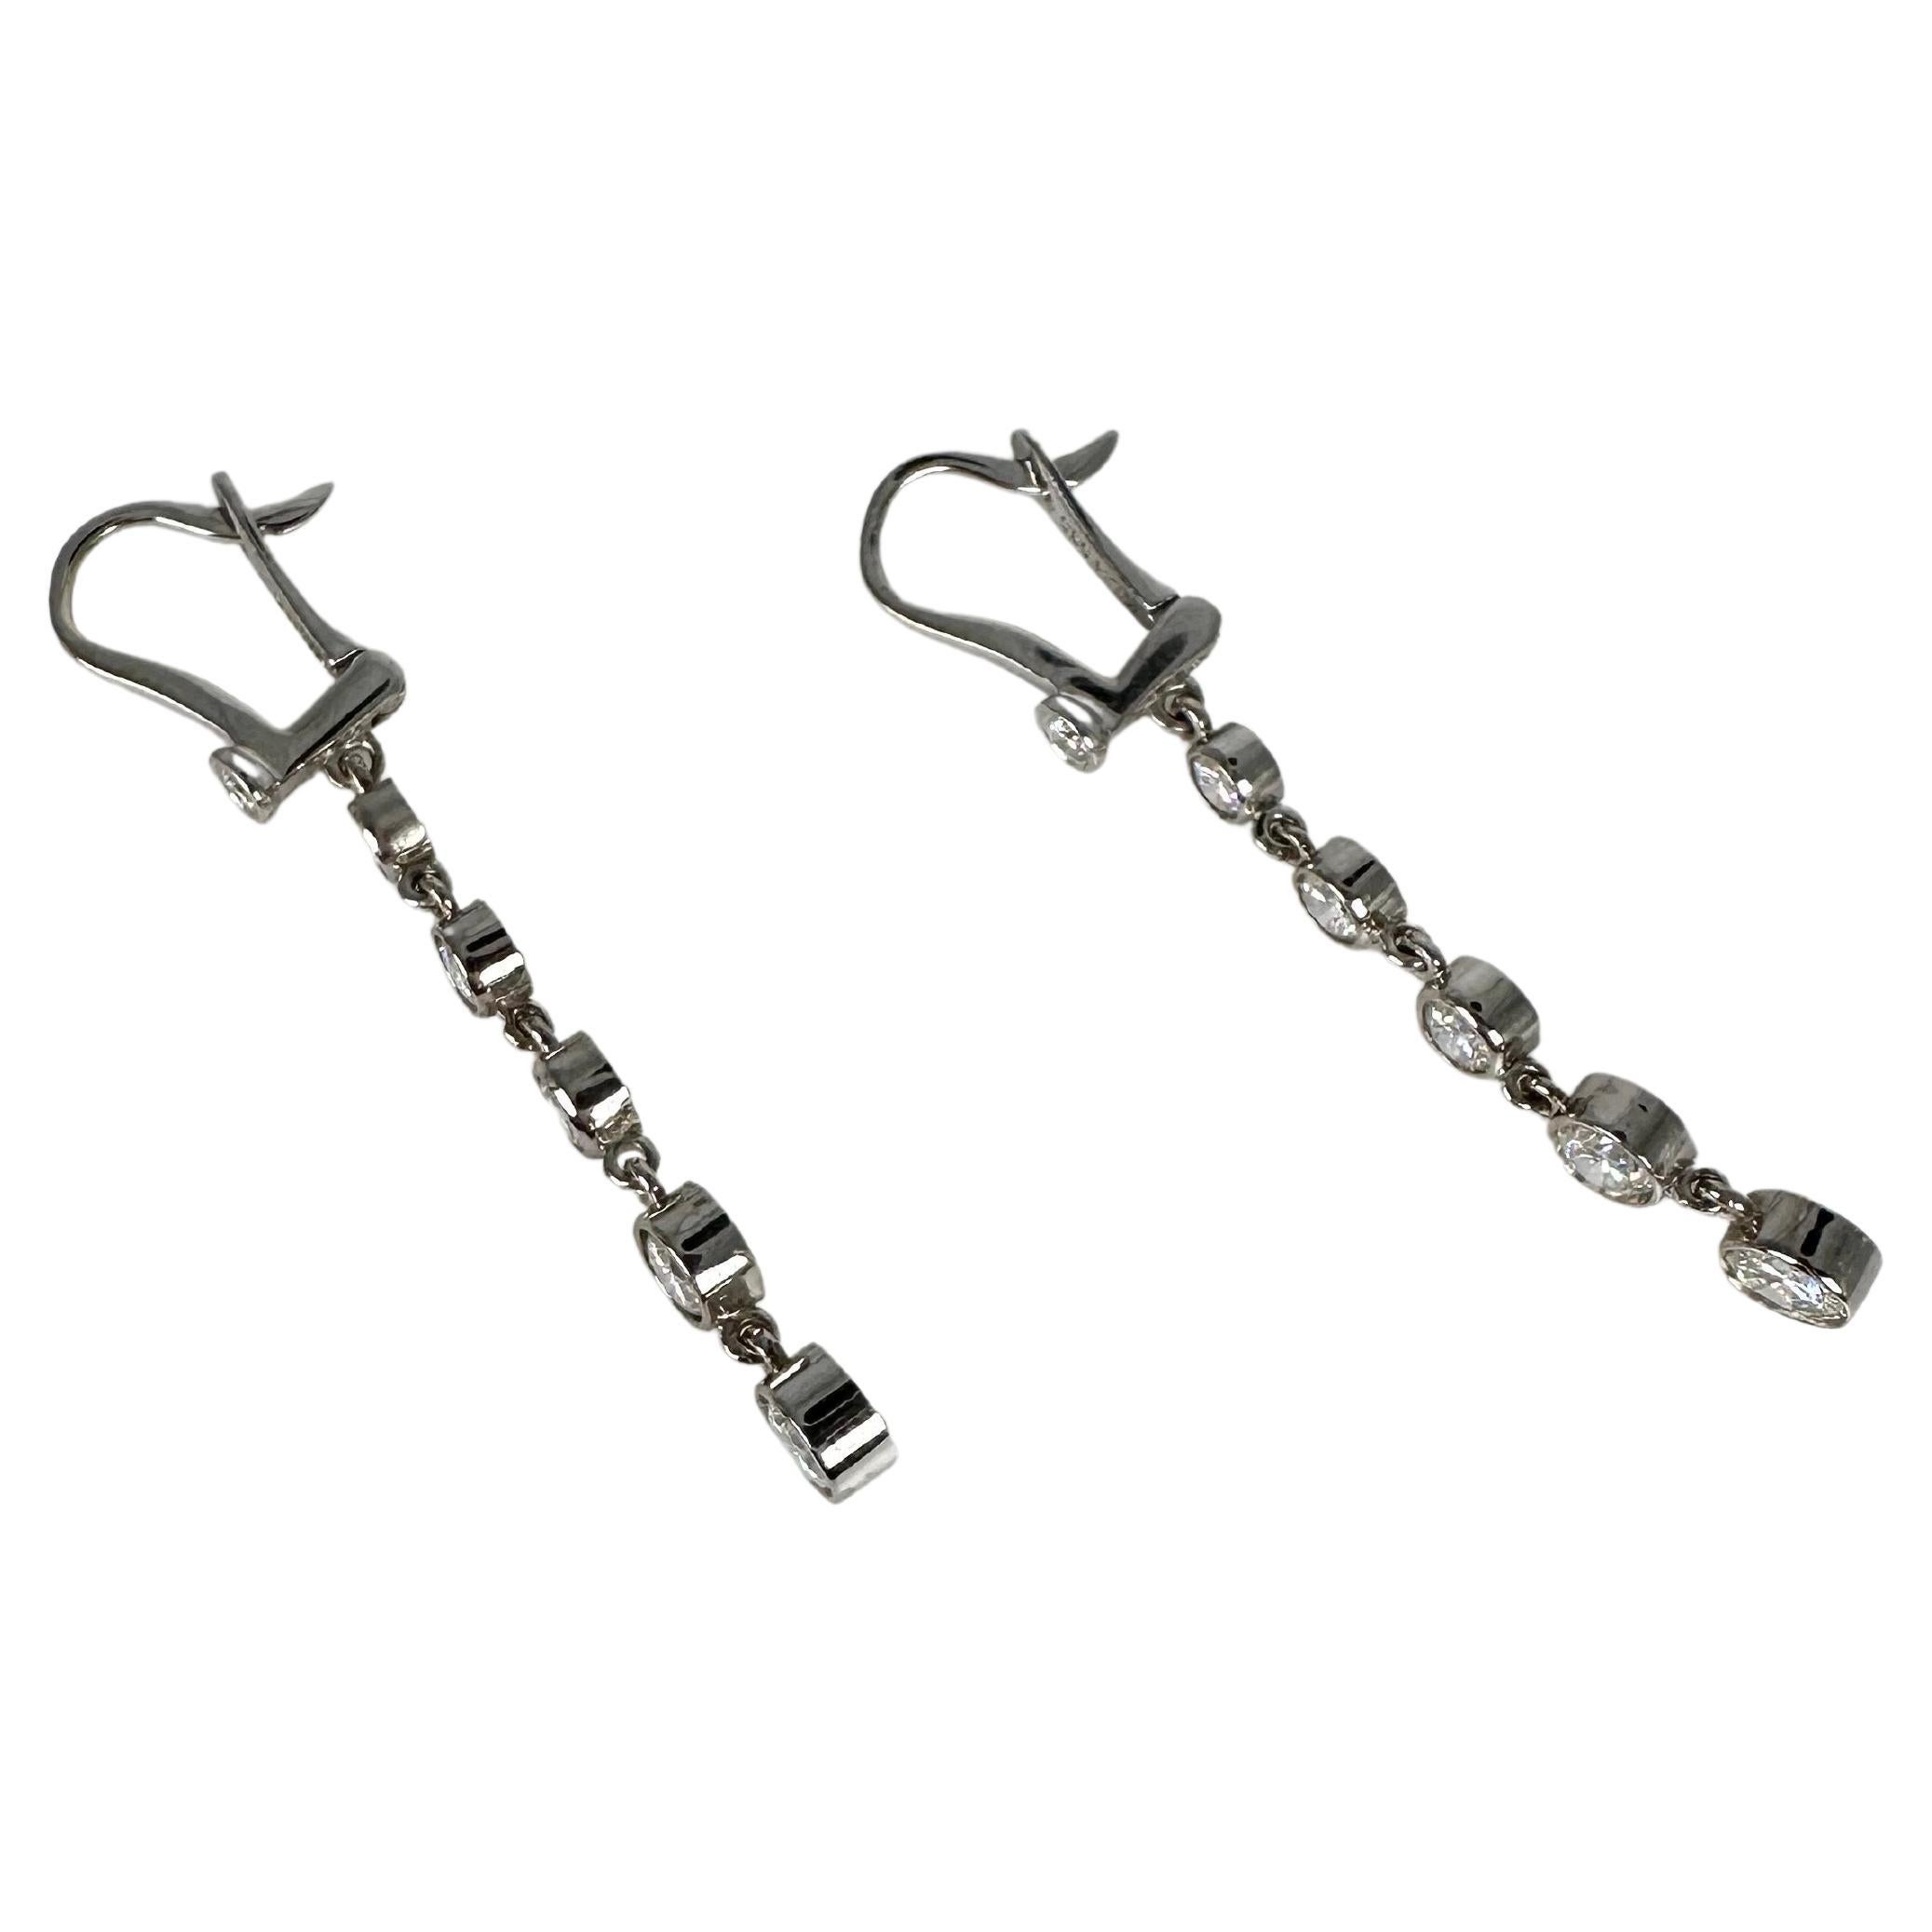 Long dangling diamond earrings weighing 1.26 carats of sparkling diamonds in modern bezel setting. the lverback closure is so snug and comfortable for everyday wear! These earrings are absolutely lovely for those loving the long earrings!

GOLD: